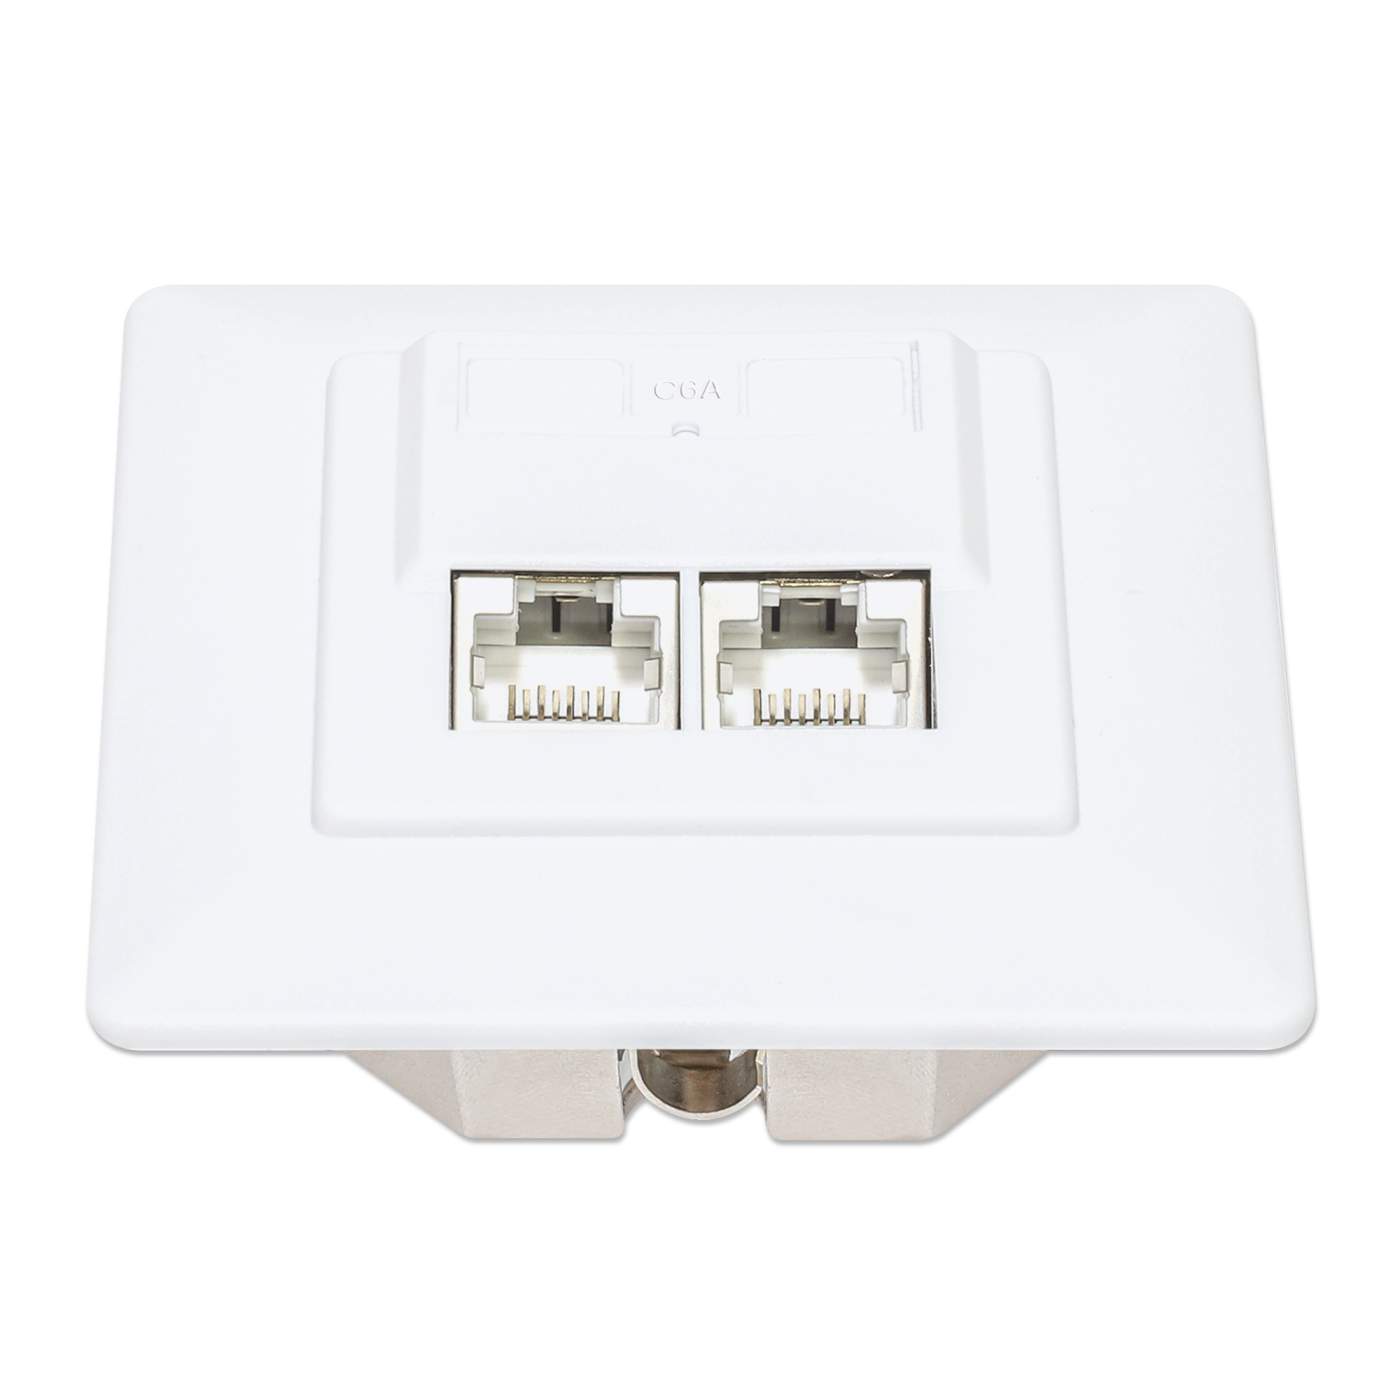 2-Port Cat6a 10G Shielded RJ45 Wall Plate Image 4